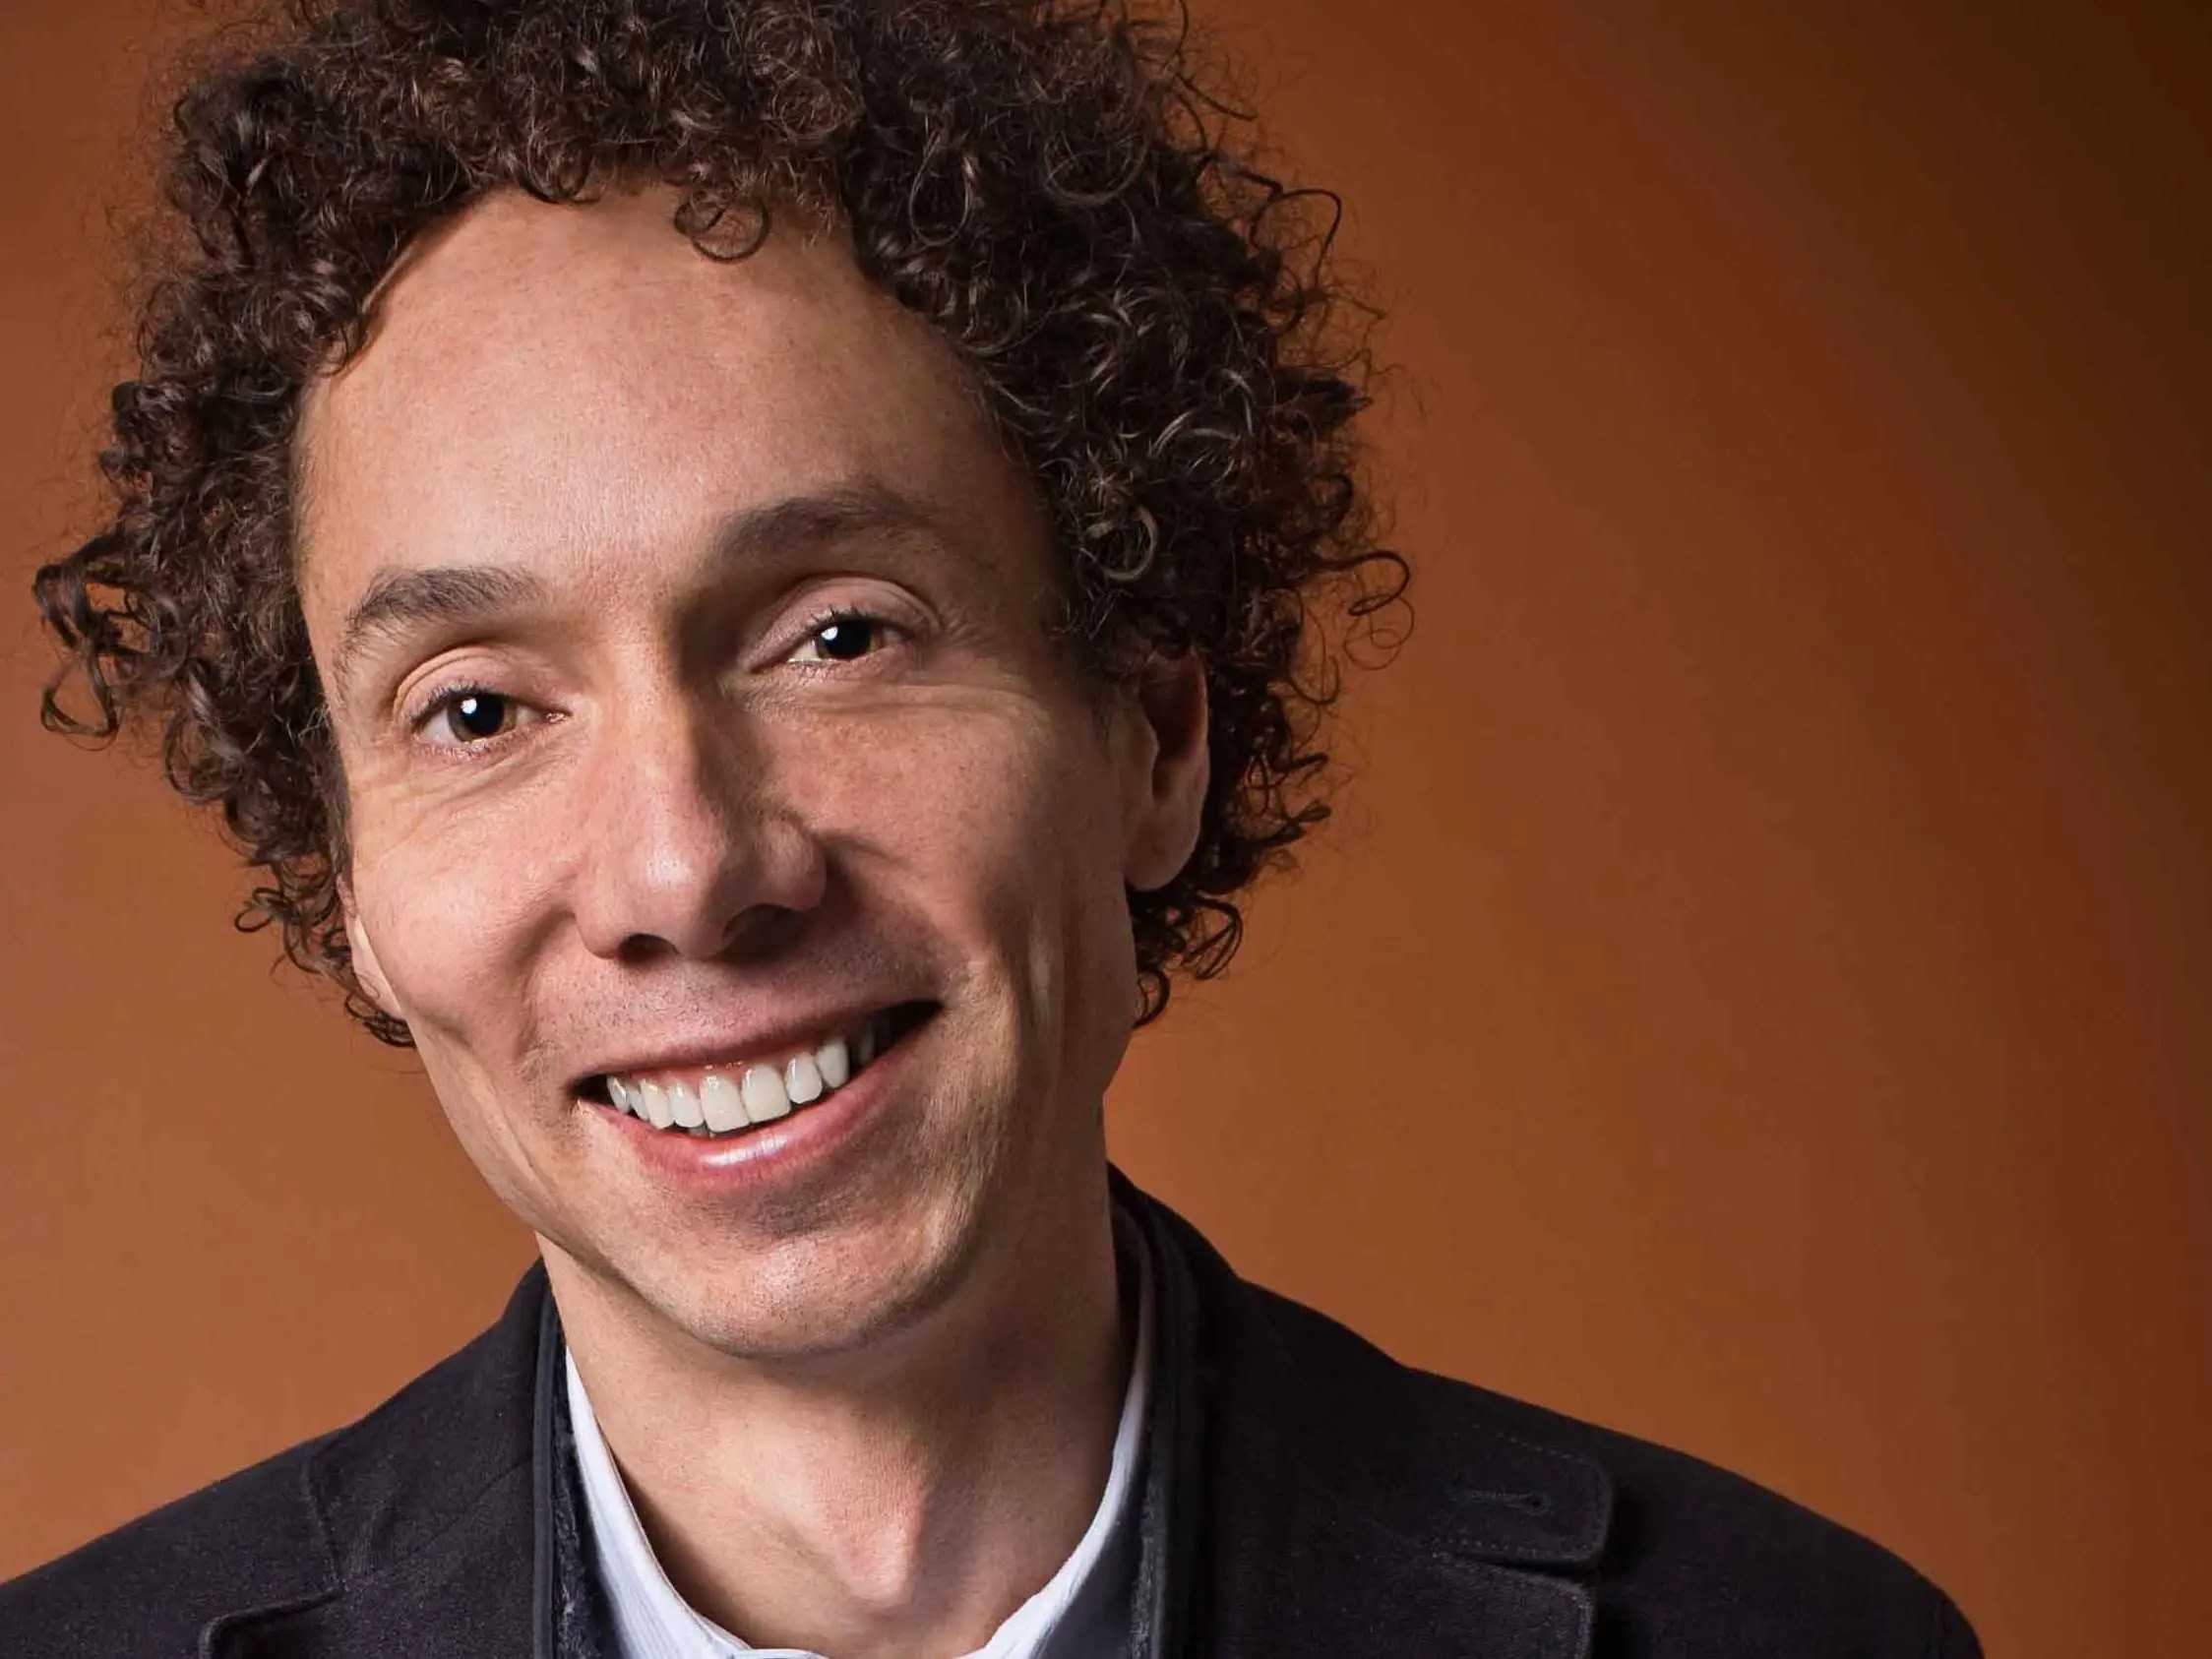 Malcolm Gladwell Reveals The Personality Trait That's Made Him So